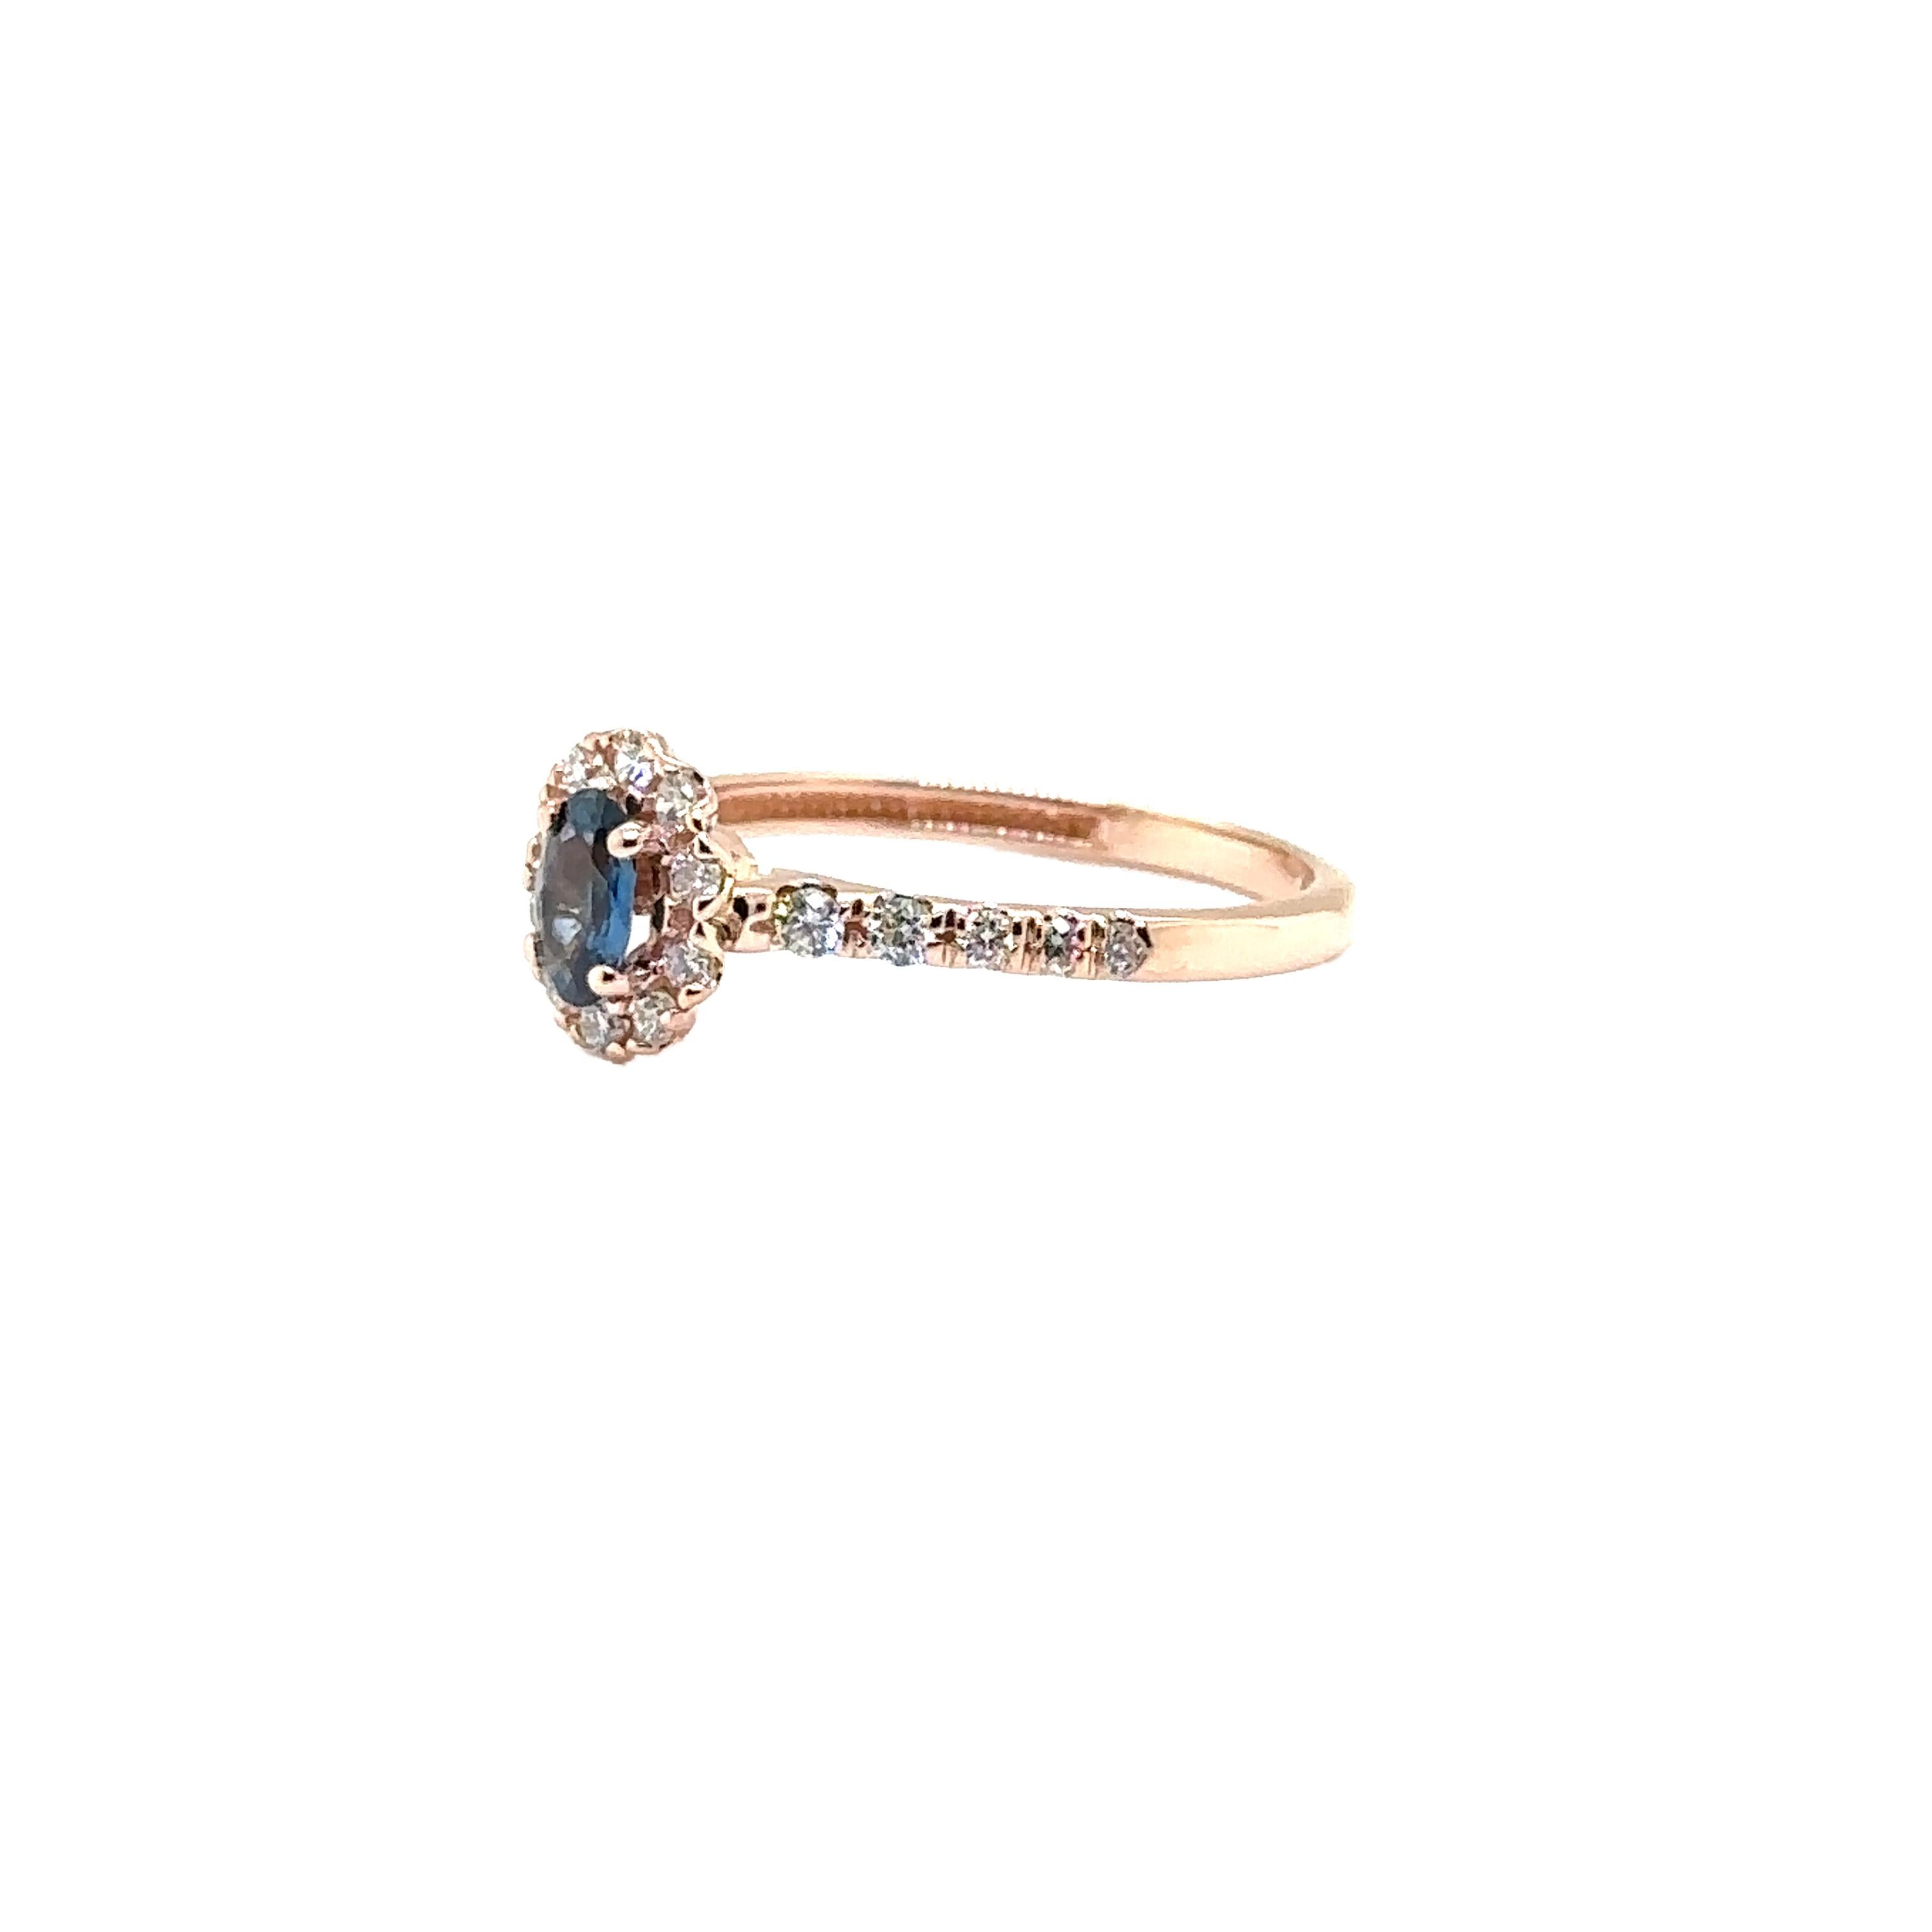 JAS-21-2235 - 14K ROSE GOLD OVAL SAPPHIRE RING with DIAMONDS For Sale 3